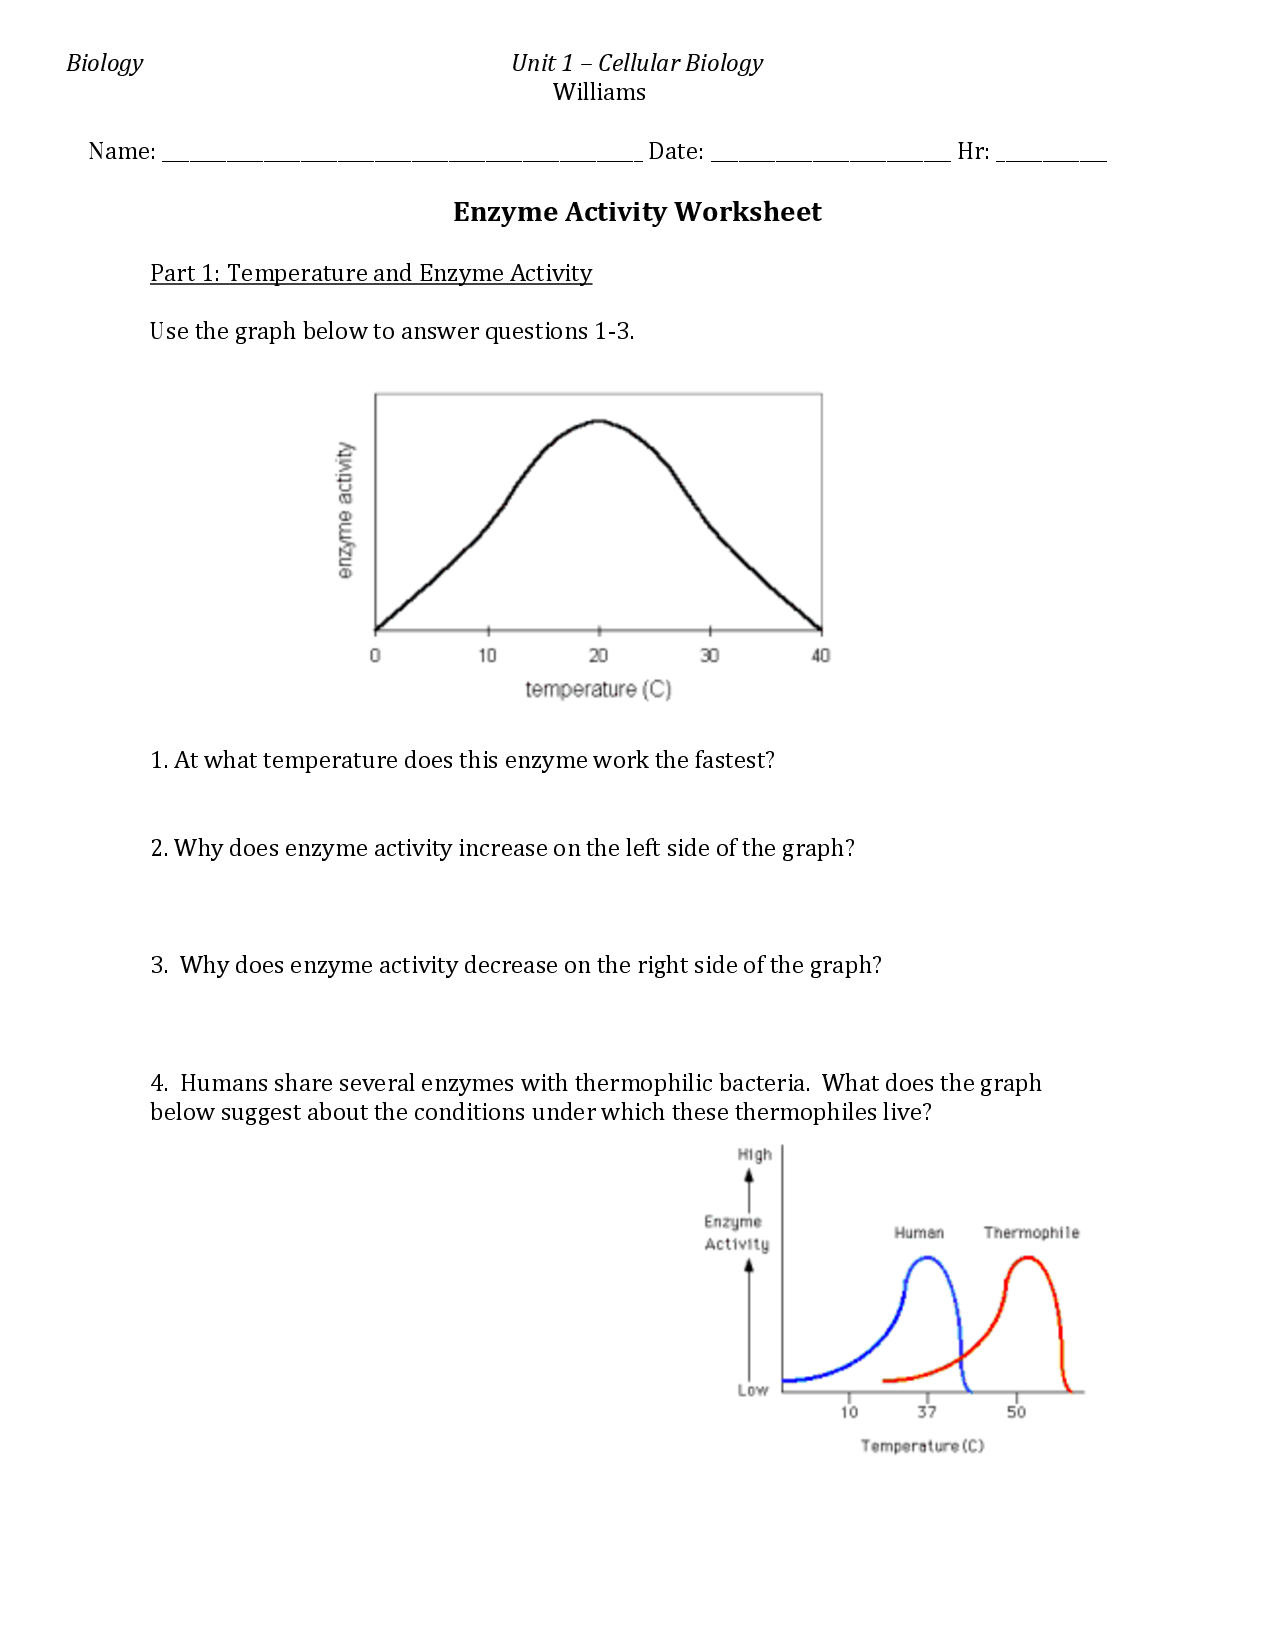 20-best-images-of-explain-how-enzymes-work-enzyme-graph-worksheet-1-answers-using-enzyme